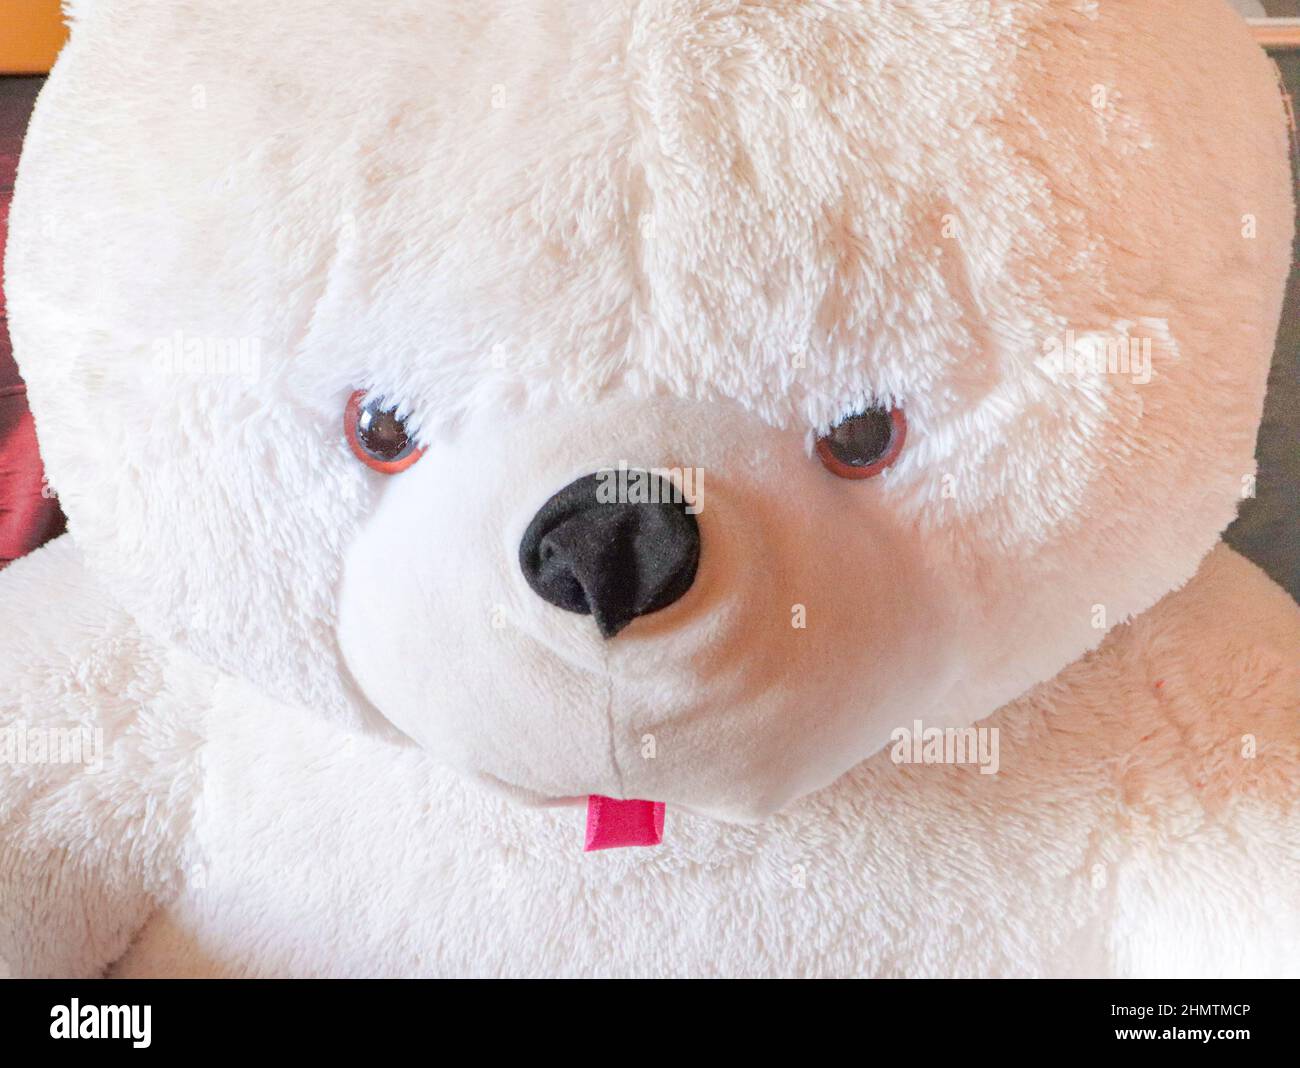 Free Images : sweet, cute, mammal, teddy bear, close up, nose